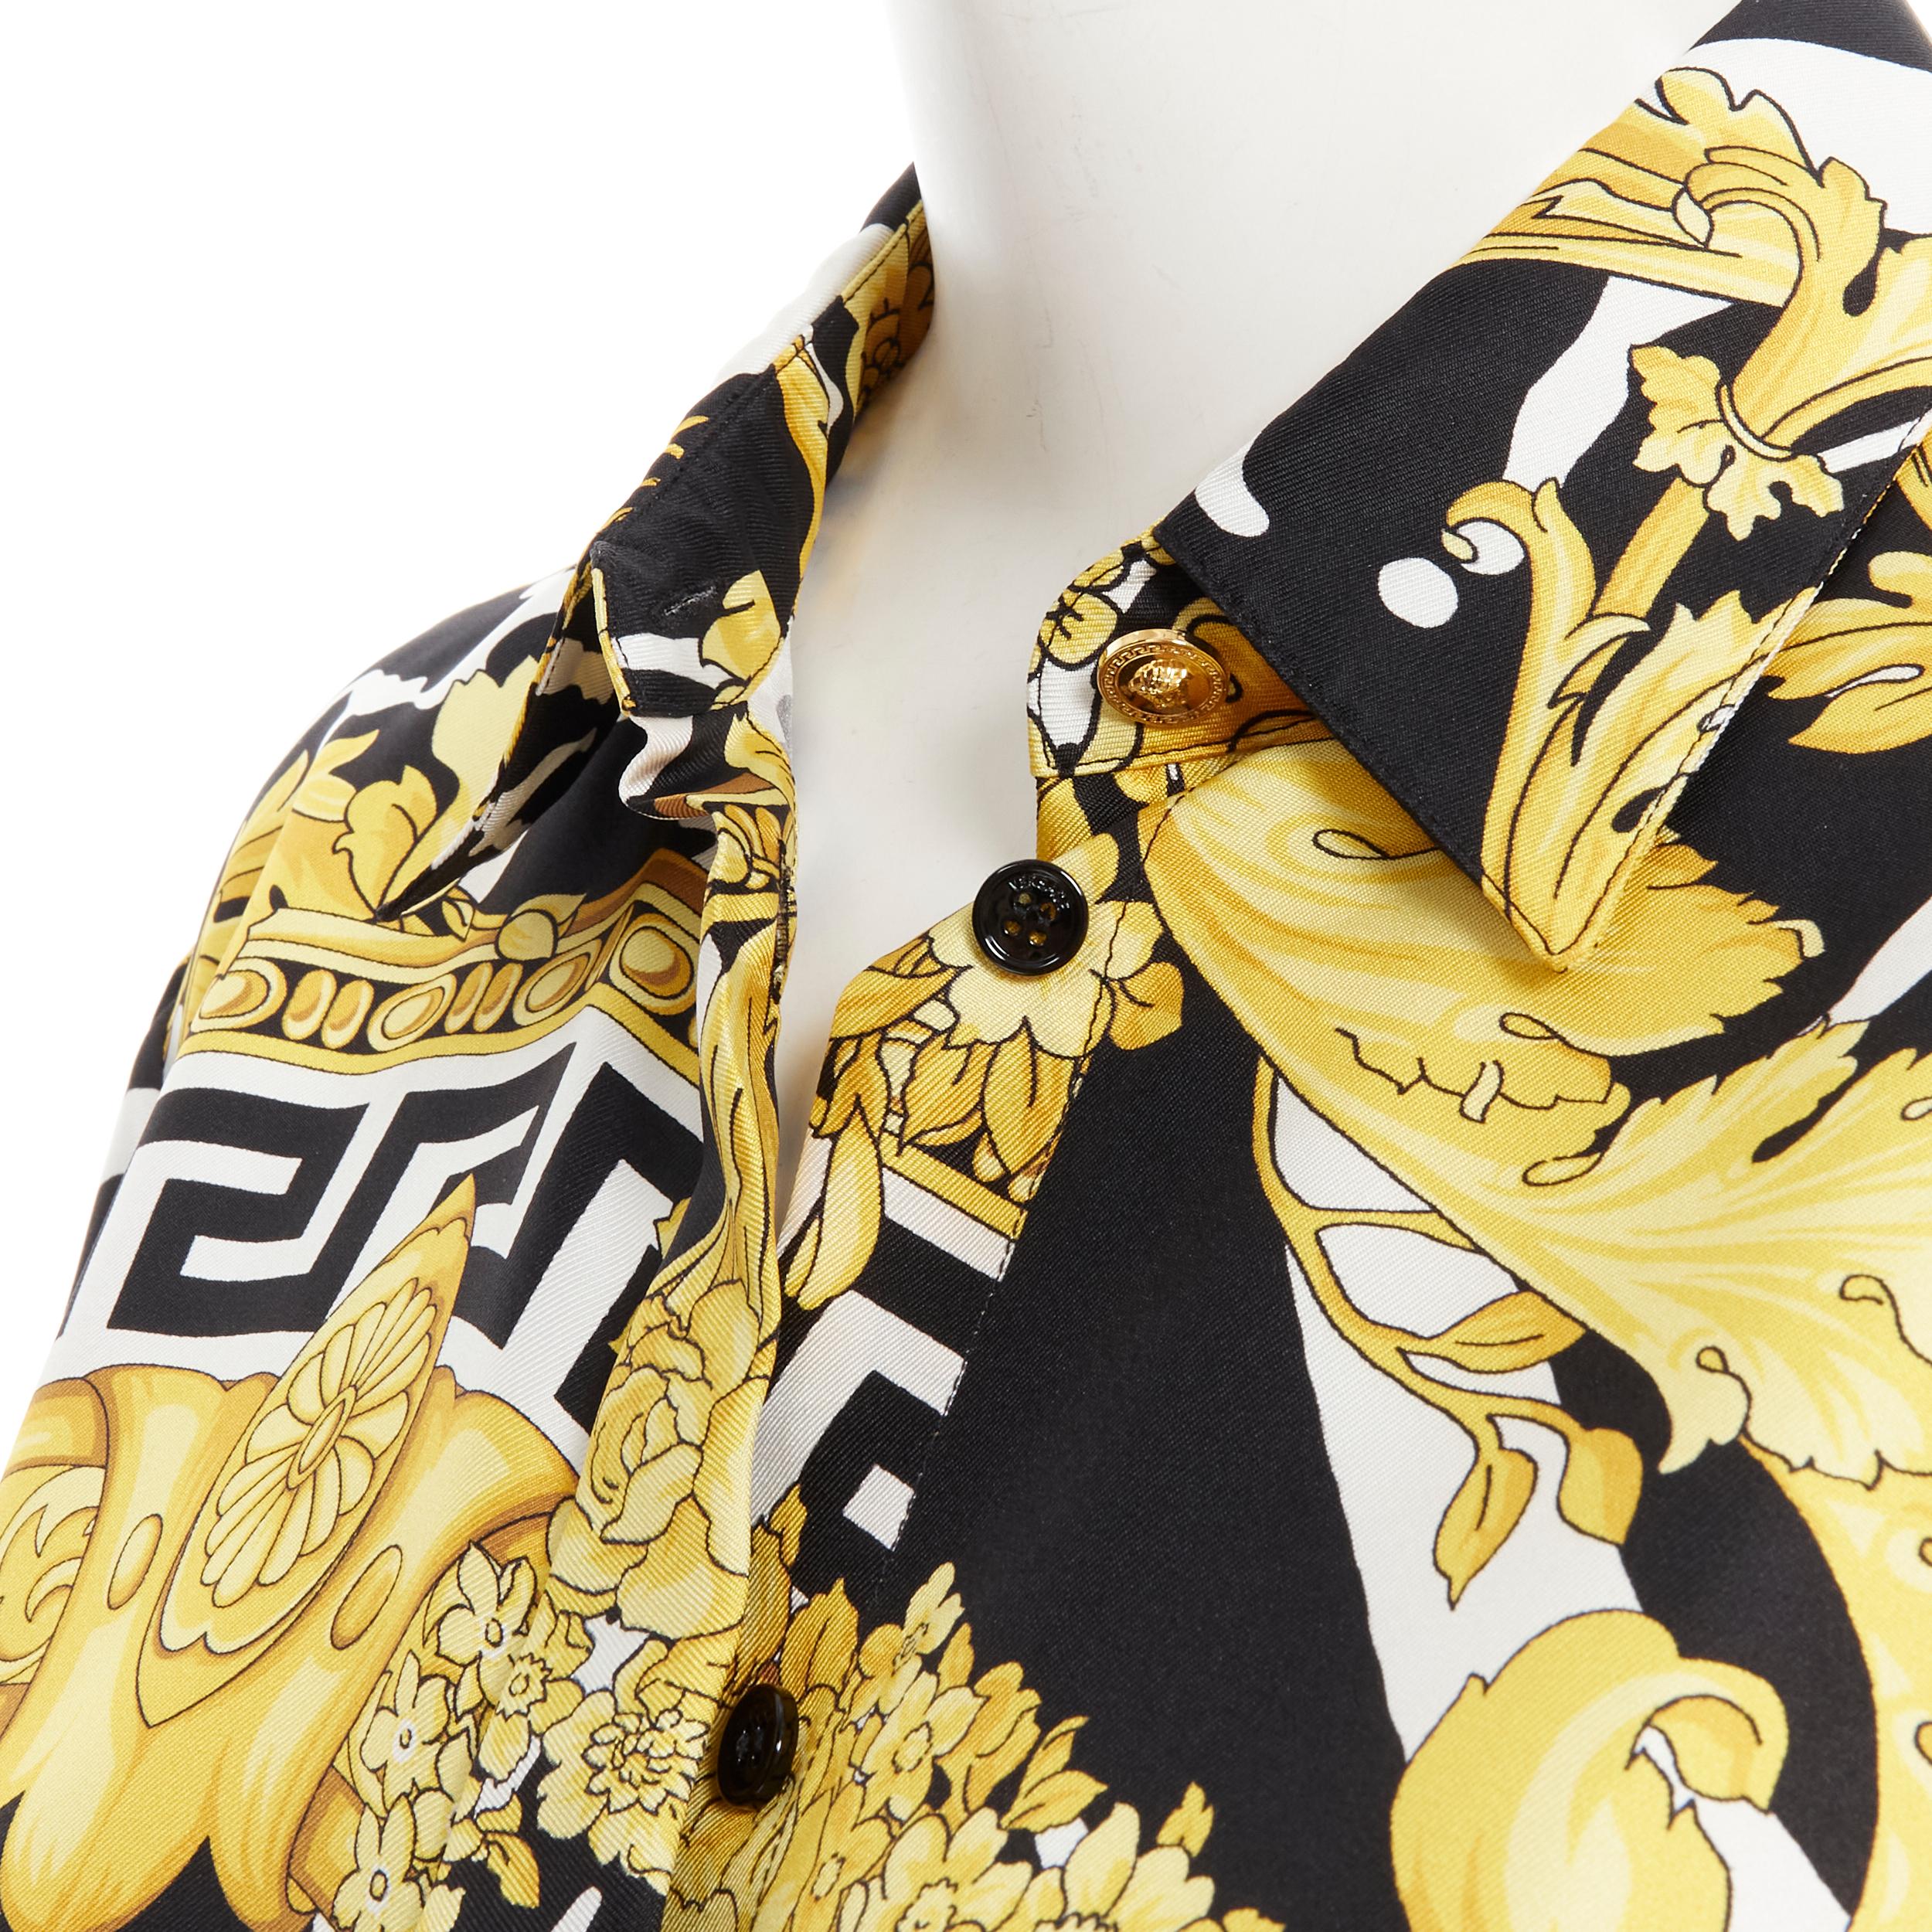 new VERSACE Runway Savage Barocco black gold Greca baroque silk shirt IT48 XXL Reference: TGAS/B01493 
Brand: Versace 
Designer: Donatella Versace 
Material: Silk 
Color: Gold 
Pattern: Floral 
Closure: Button 
Extra Detail: Gold Medusa button at